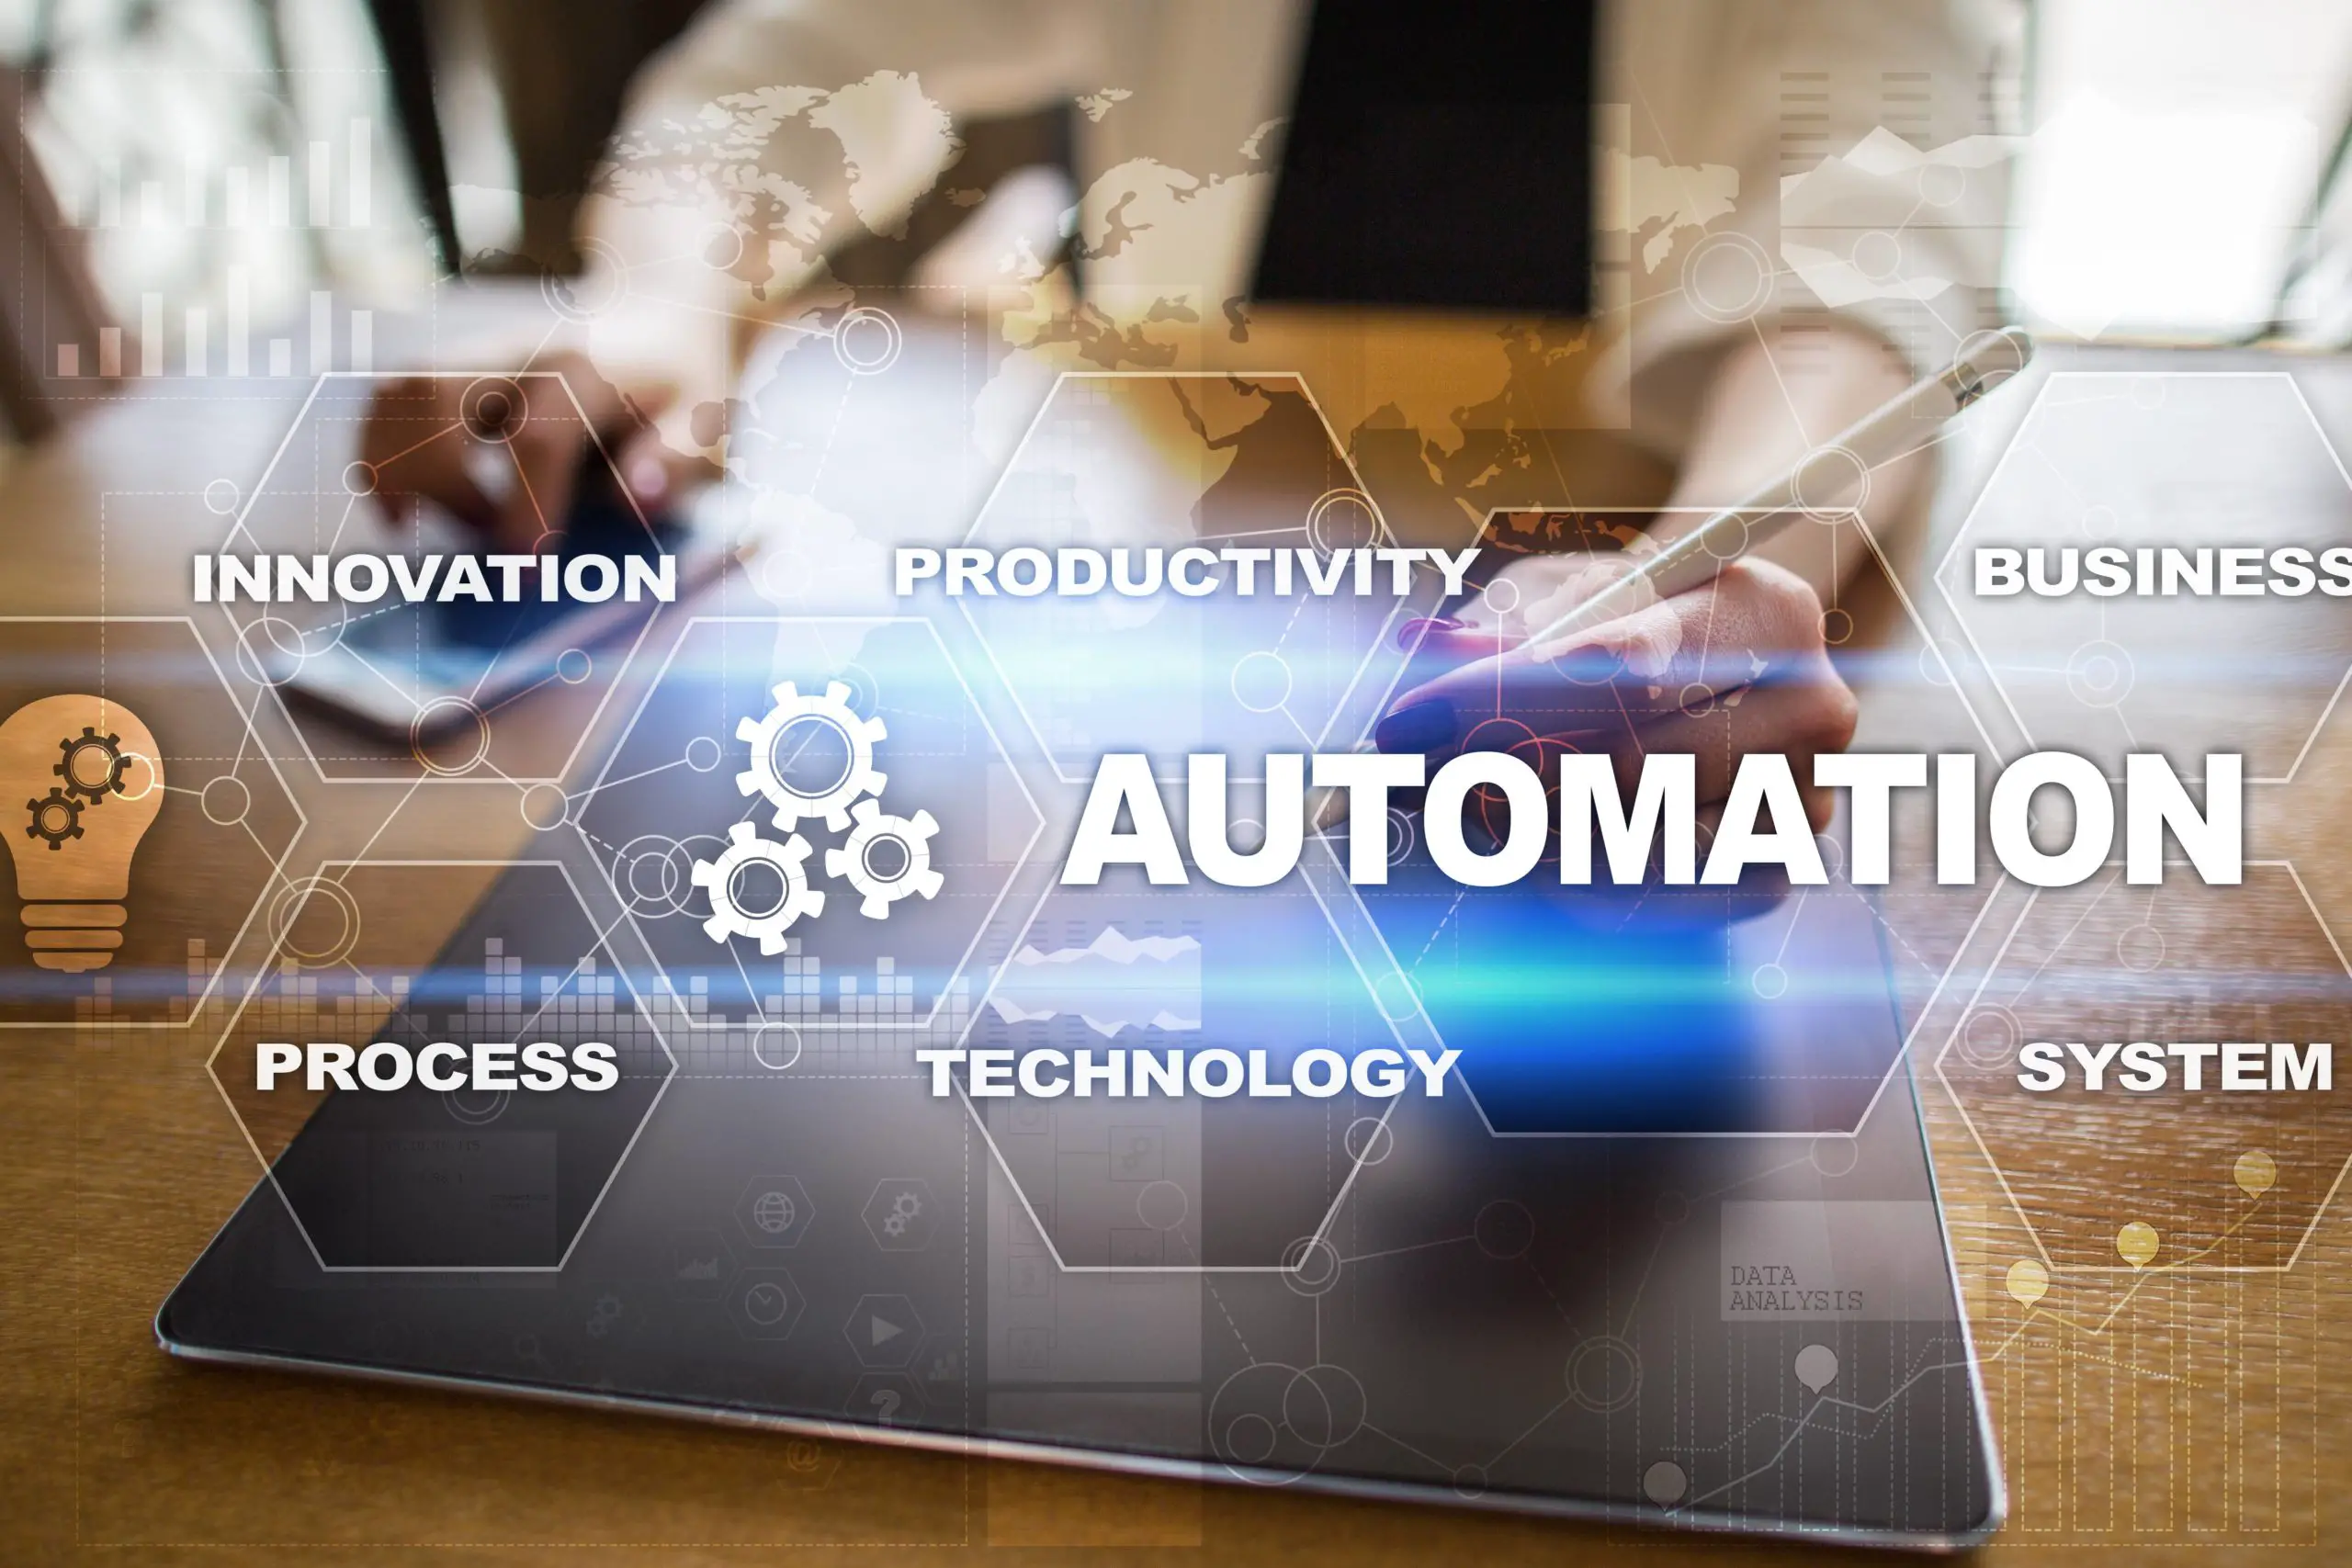 How Hexomatic Can Help You With Data Extraction and Work Automation